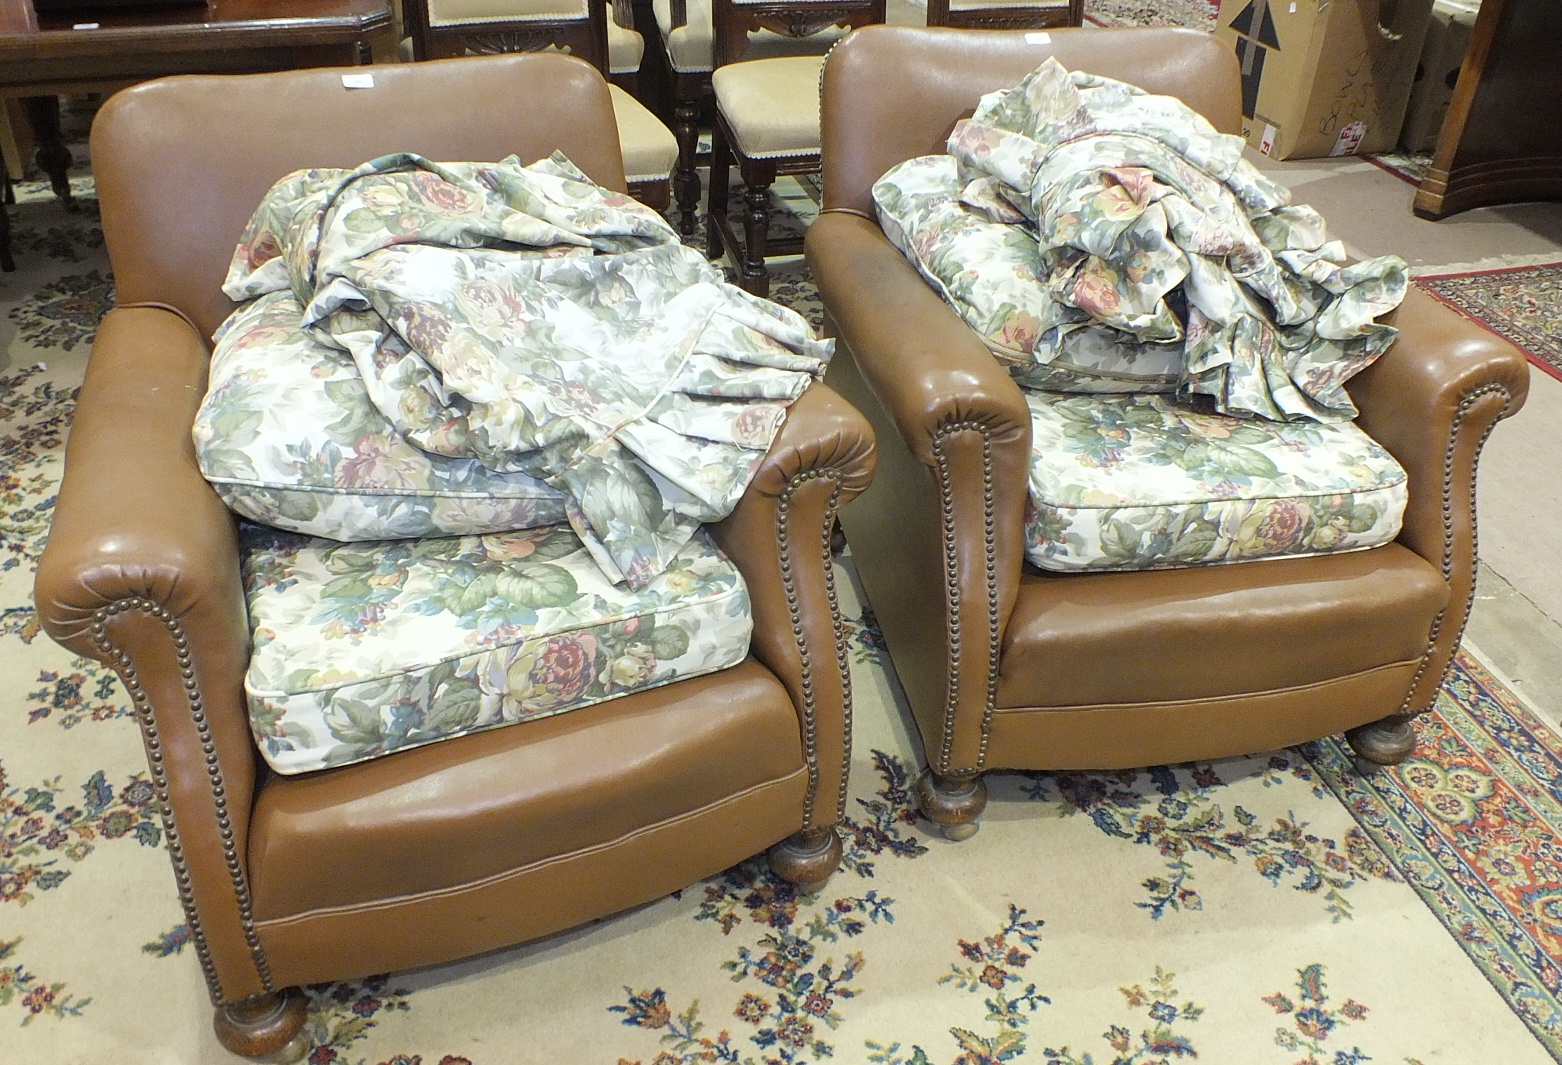 A pair of 1930's armchairs with leatherette covers and loose cushions, (2).